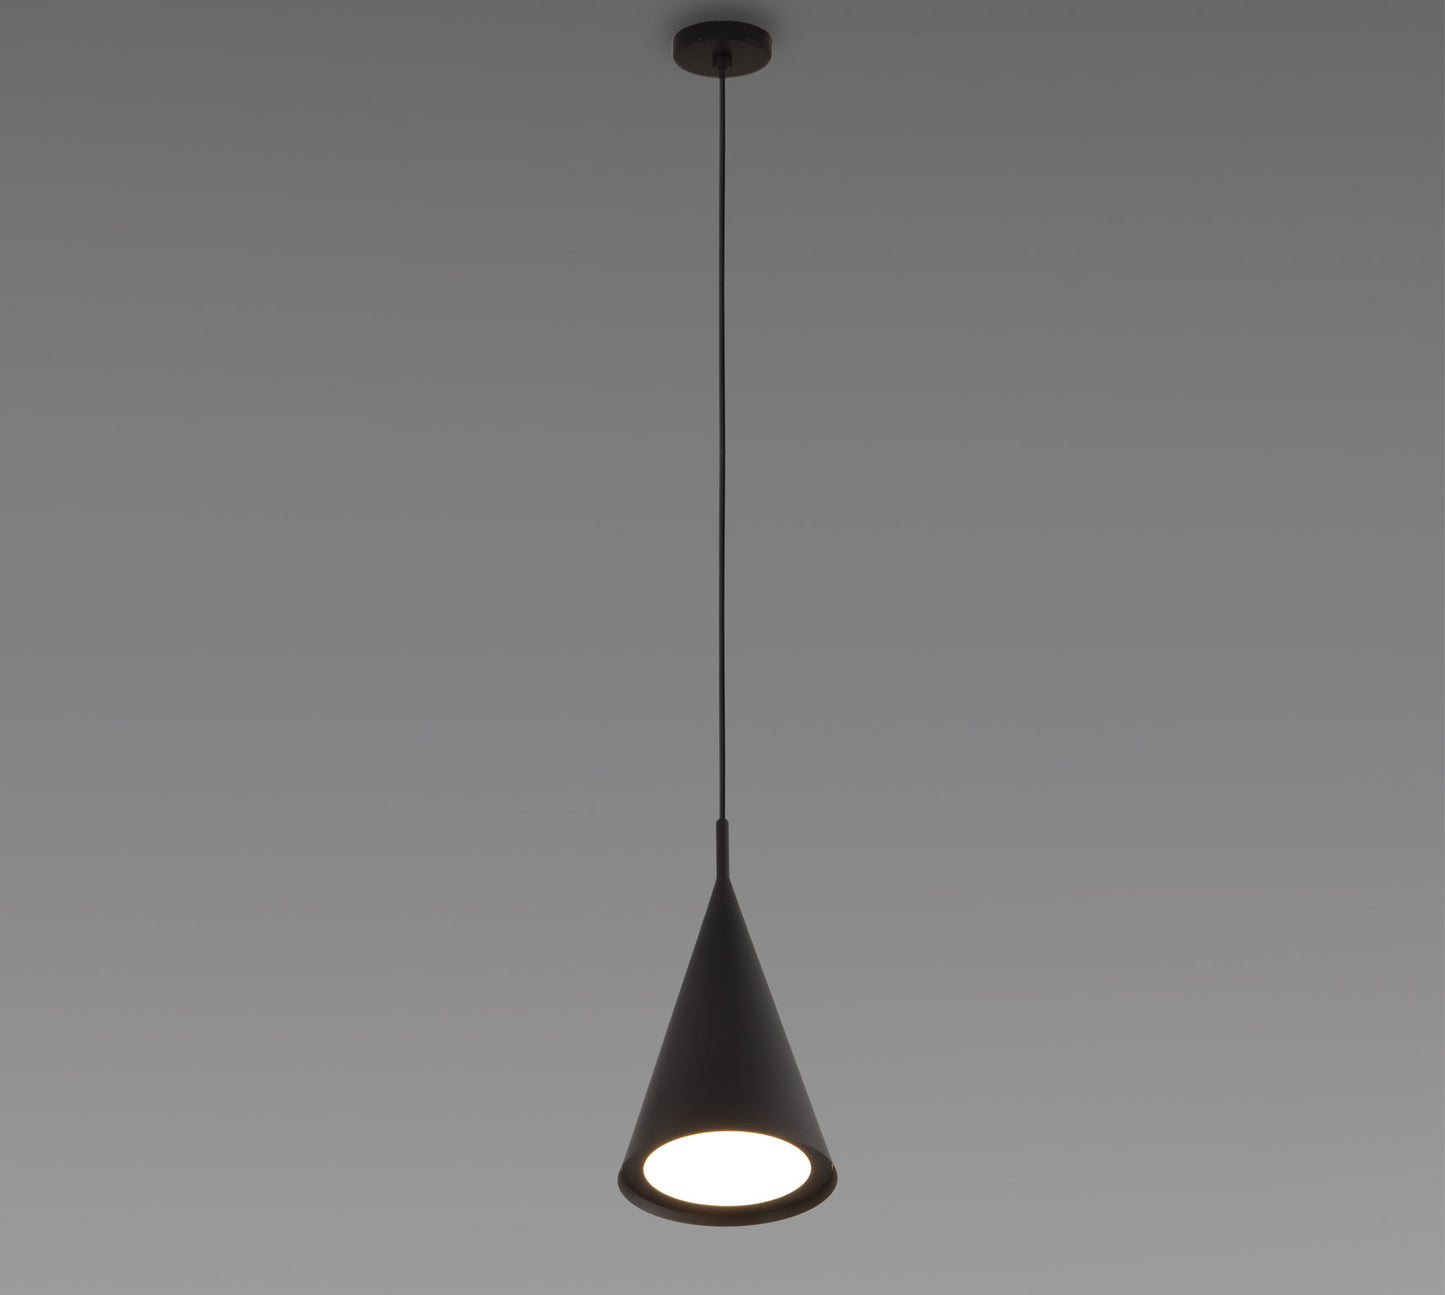 GORDON PENDANT 561.22 BY TOOY from $748.00